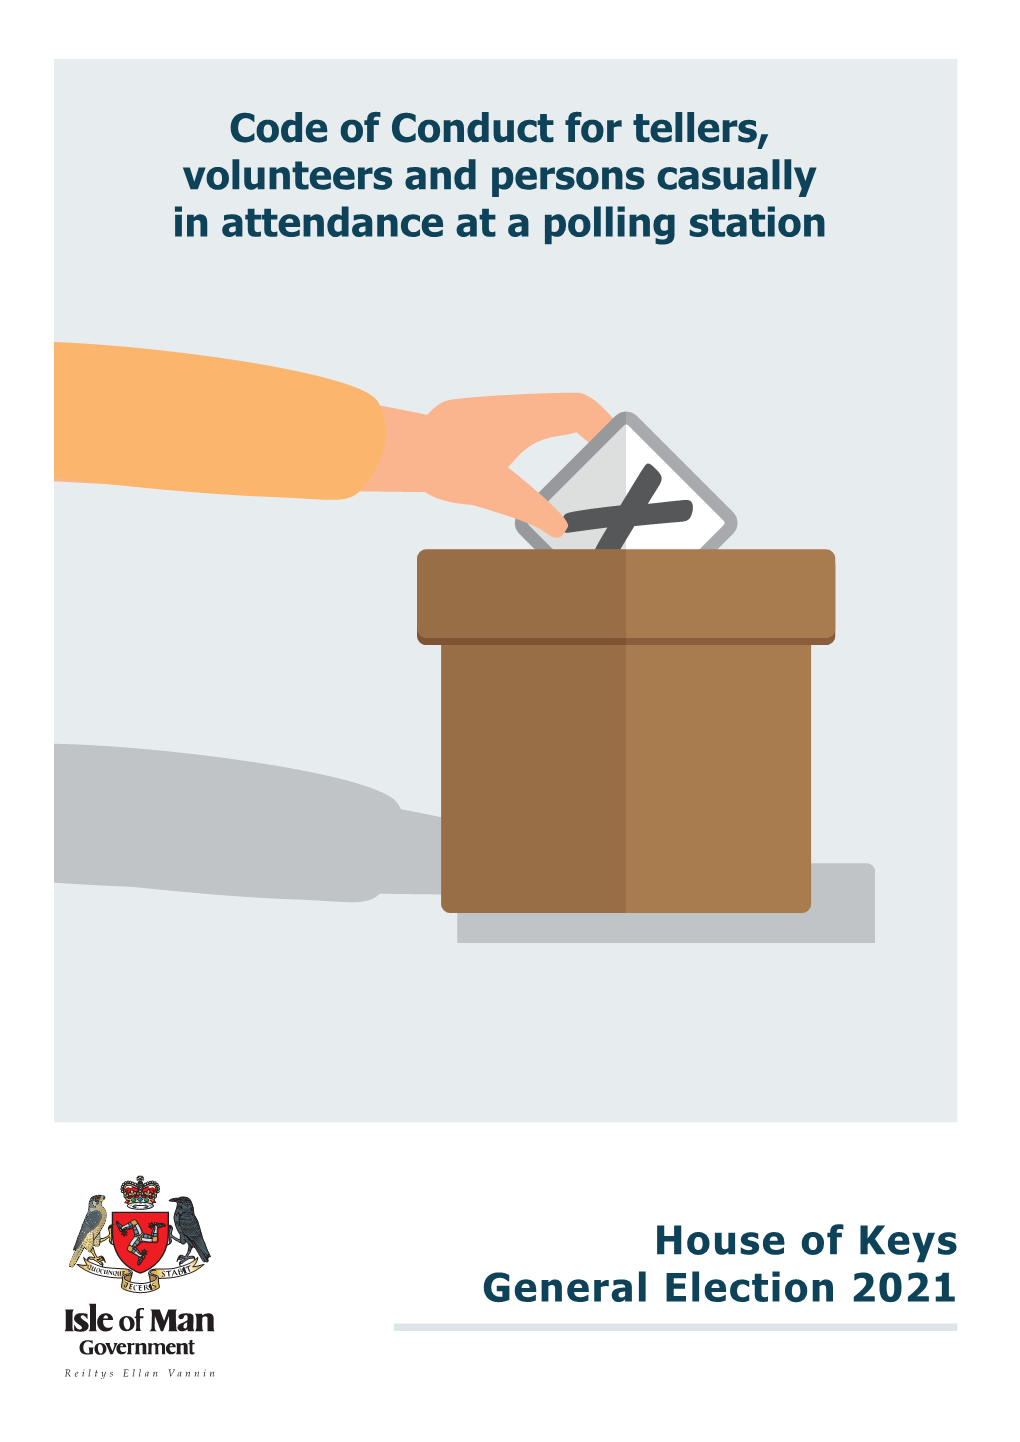 House of Keys General Election 2021 Code of Conduct for Tellers, Volunteers and Persons Casually in Attendance at a Polling Station